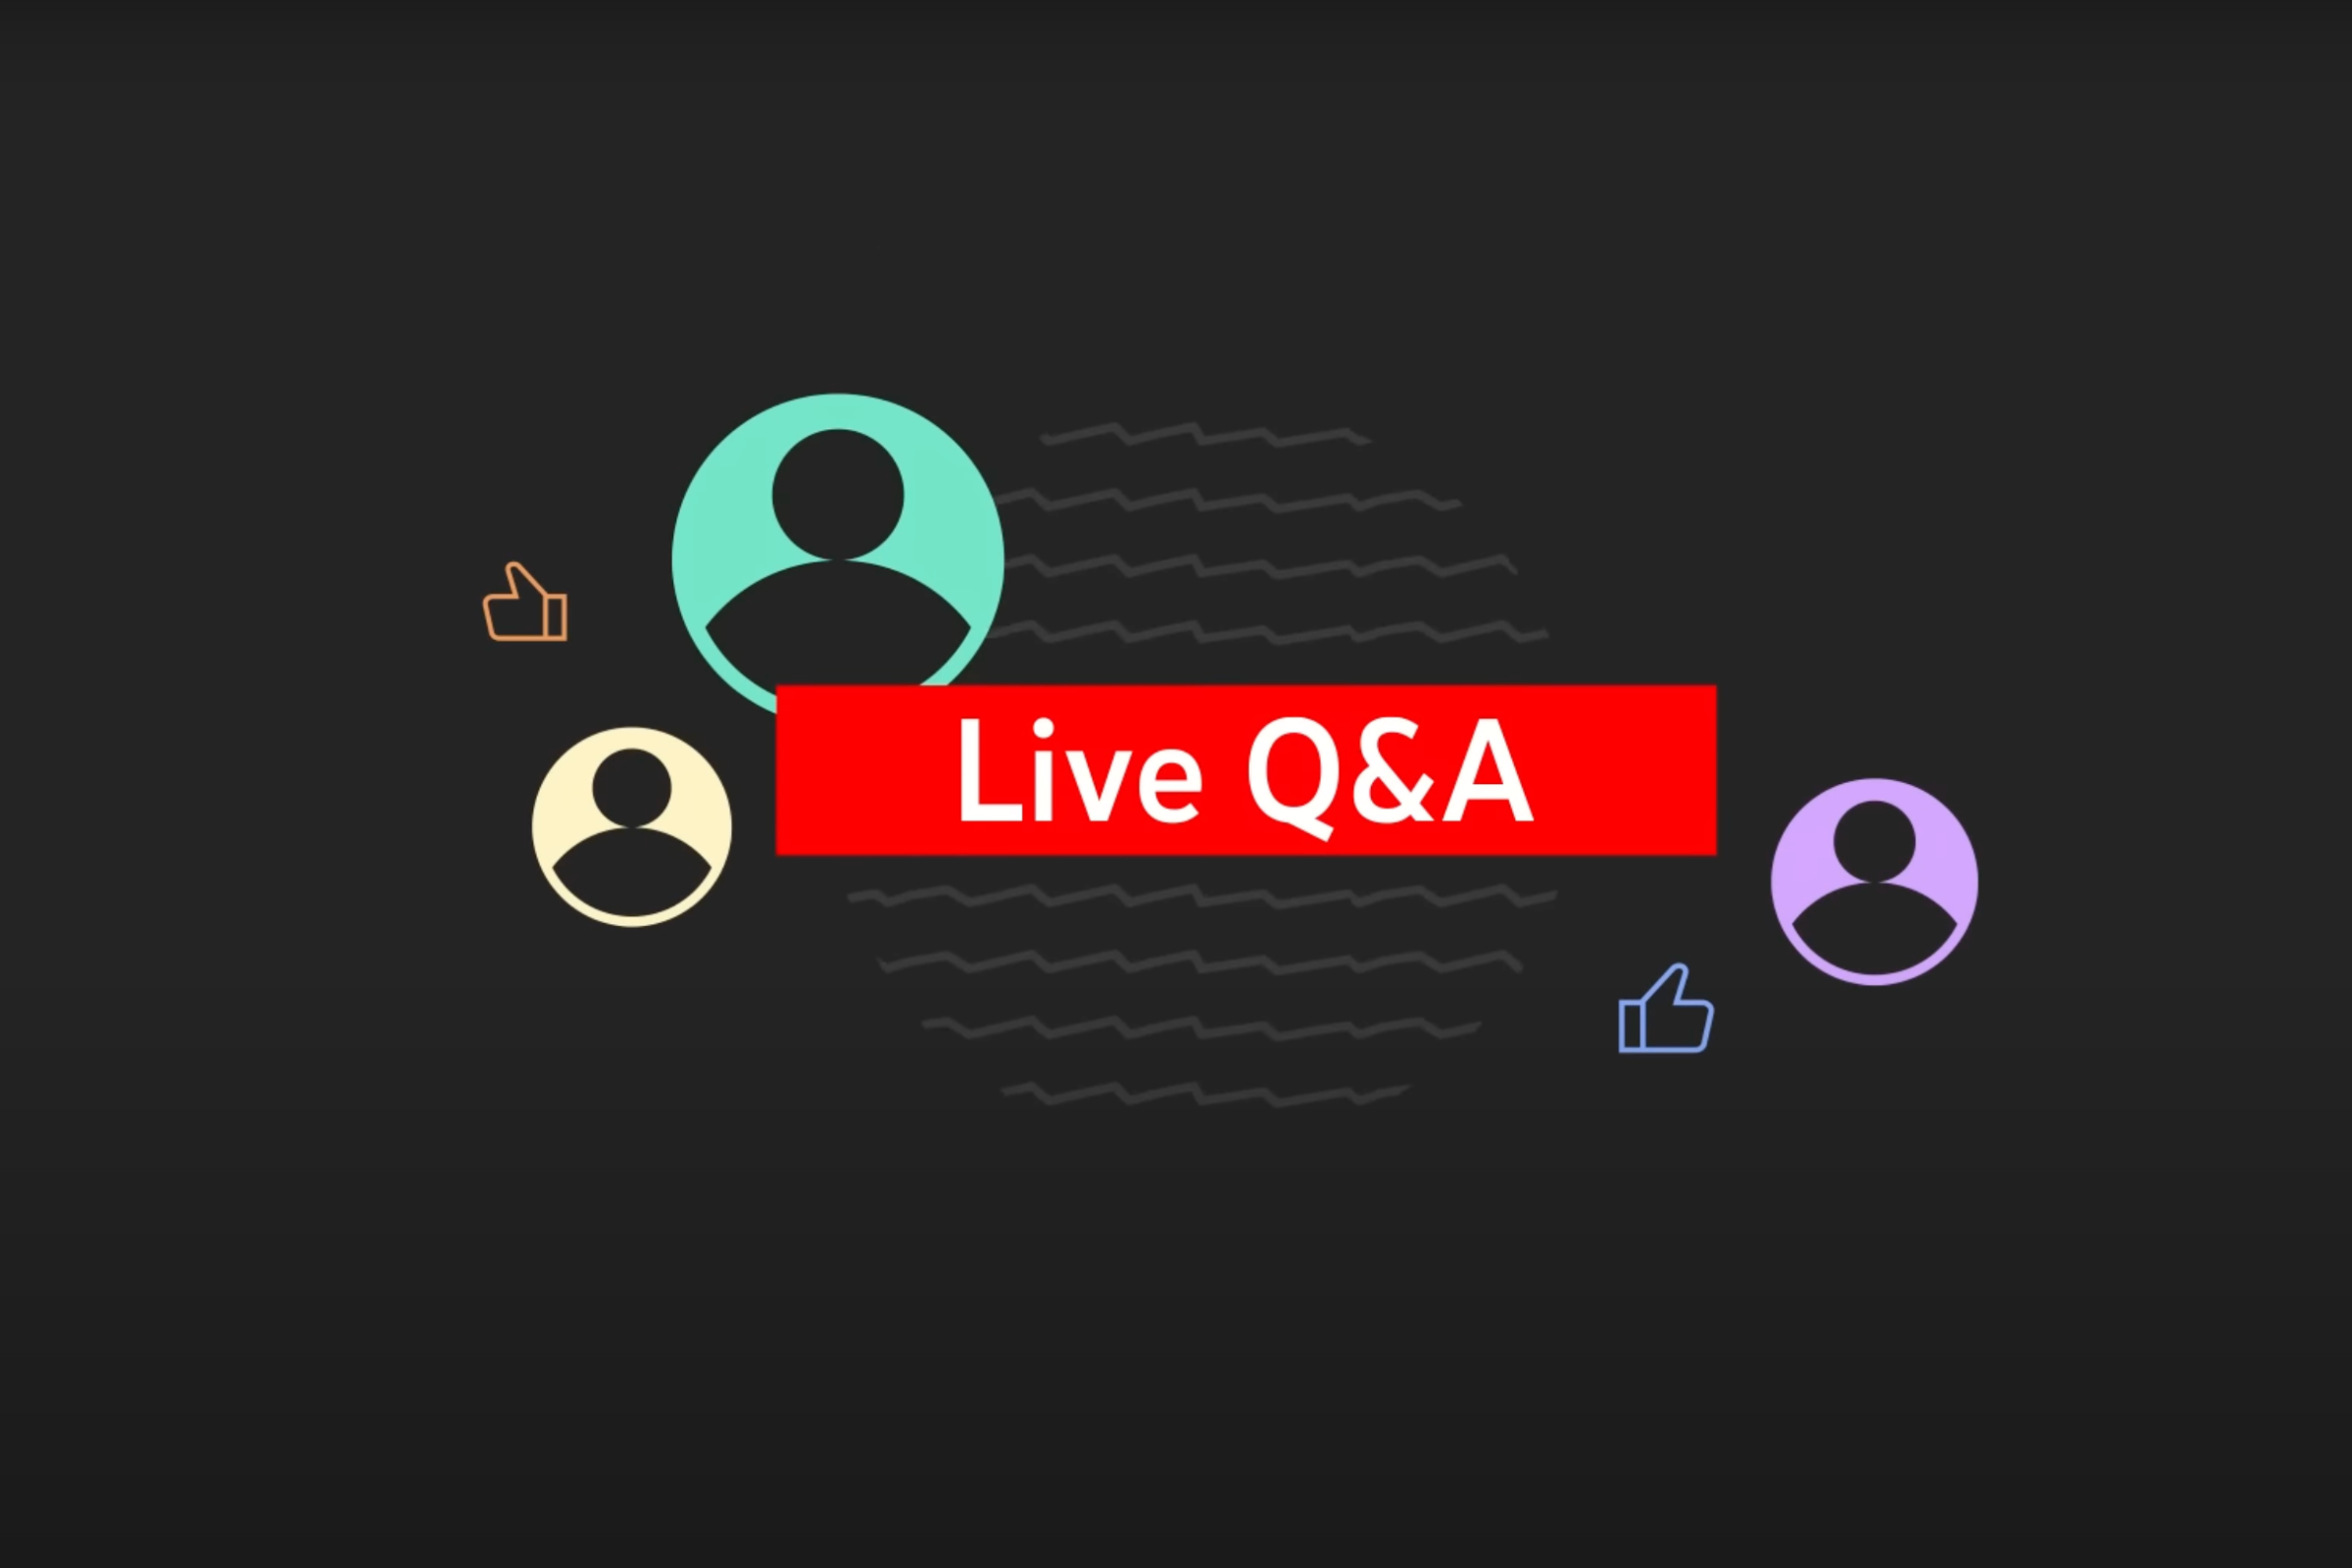 YouTube Live Q&A logo on grey background